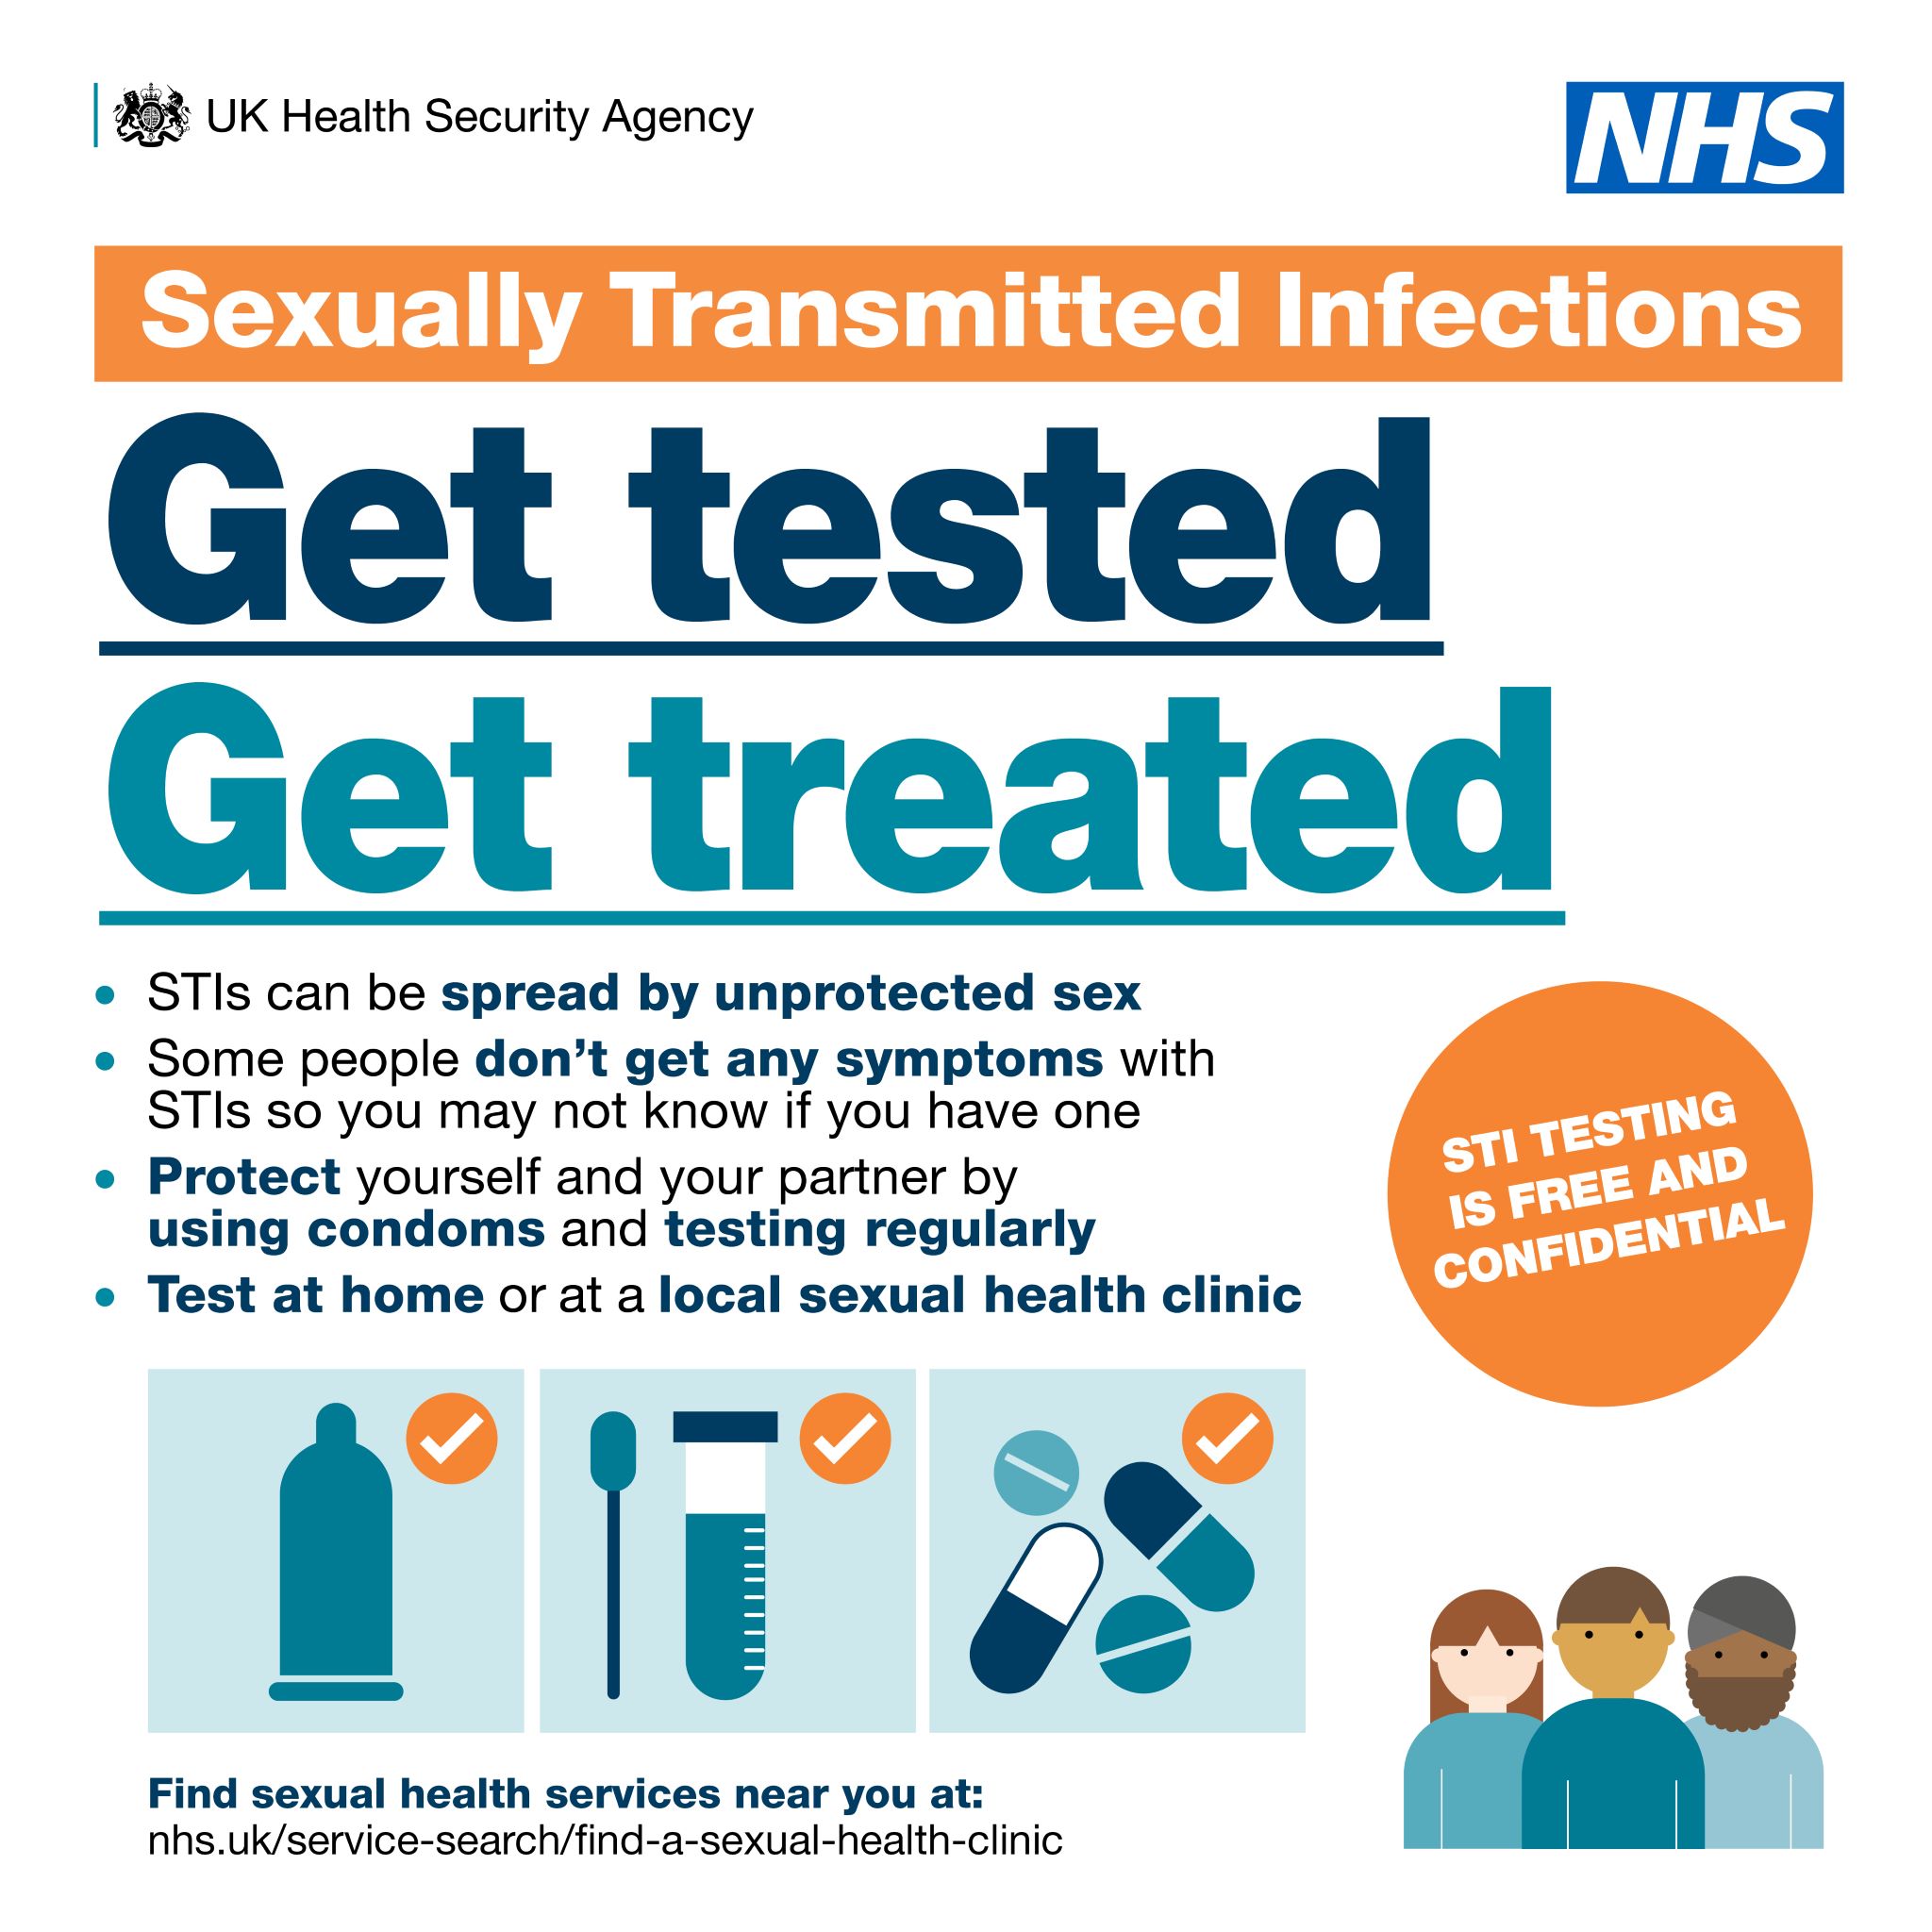 STI Testing is free and confidential pic image